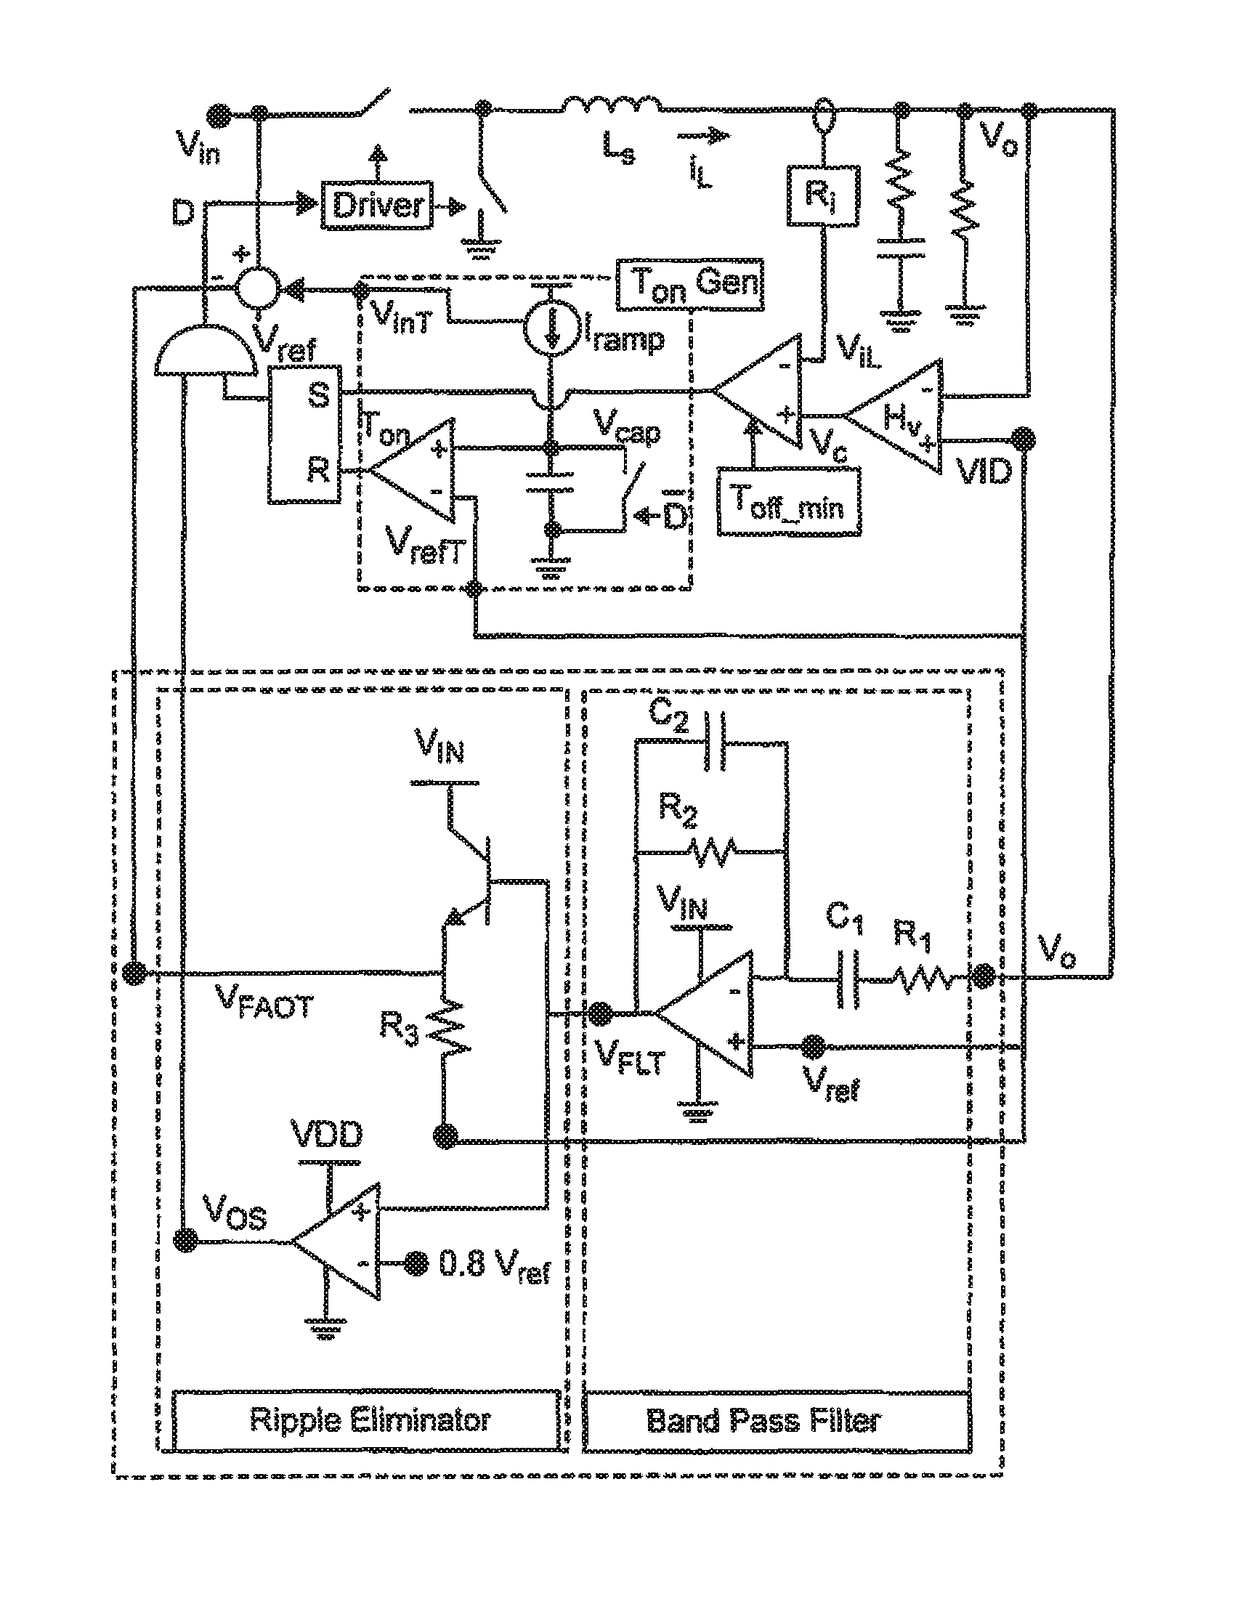 Transient performance improvement for constant on-time power converters